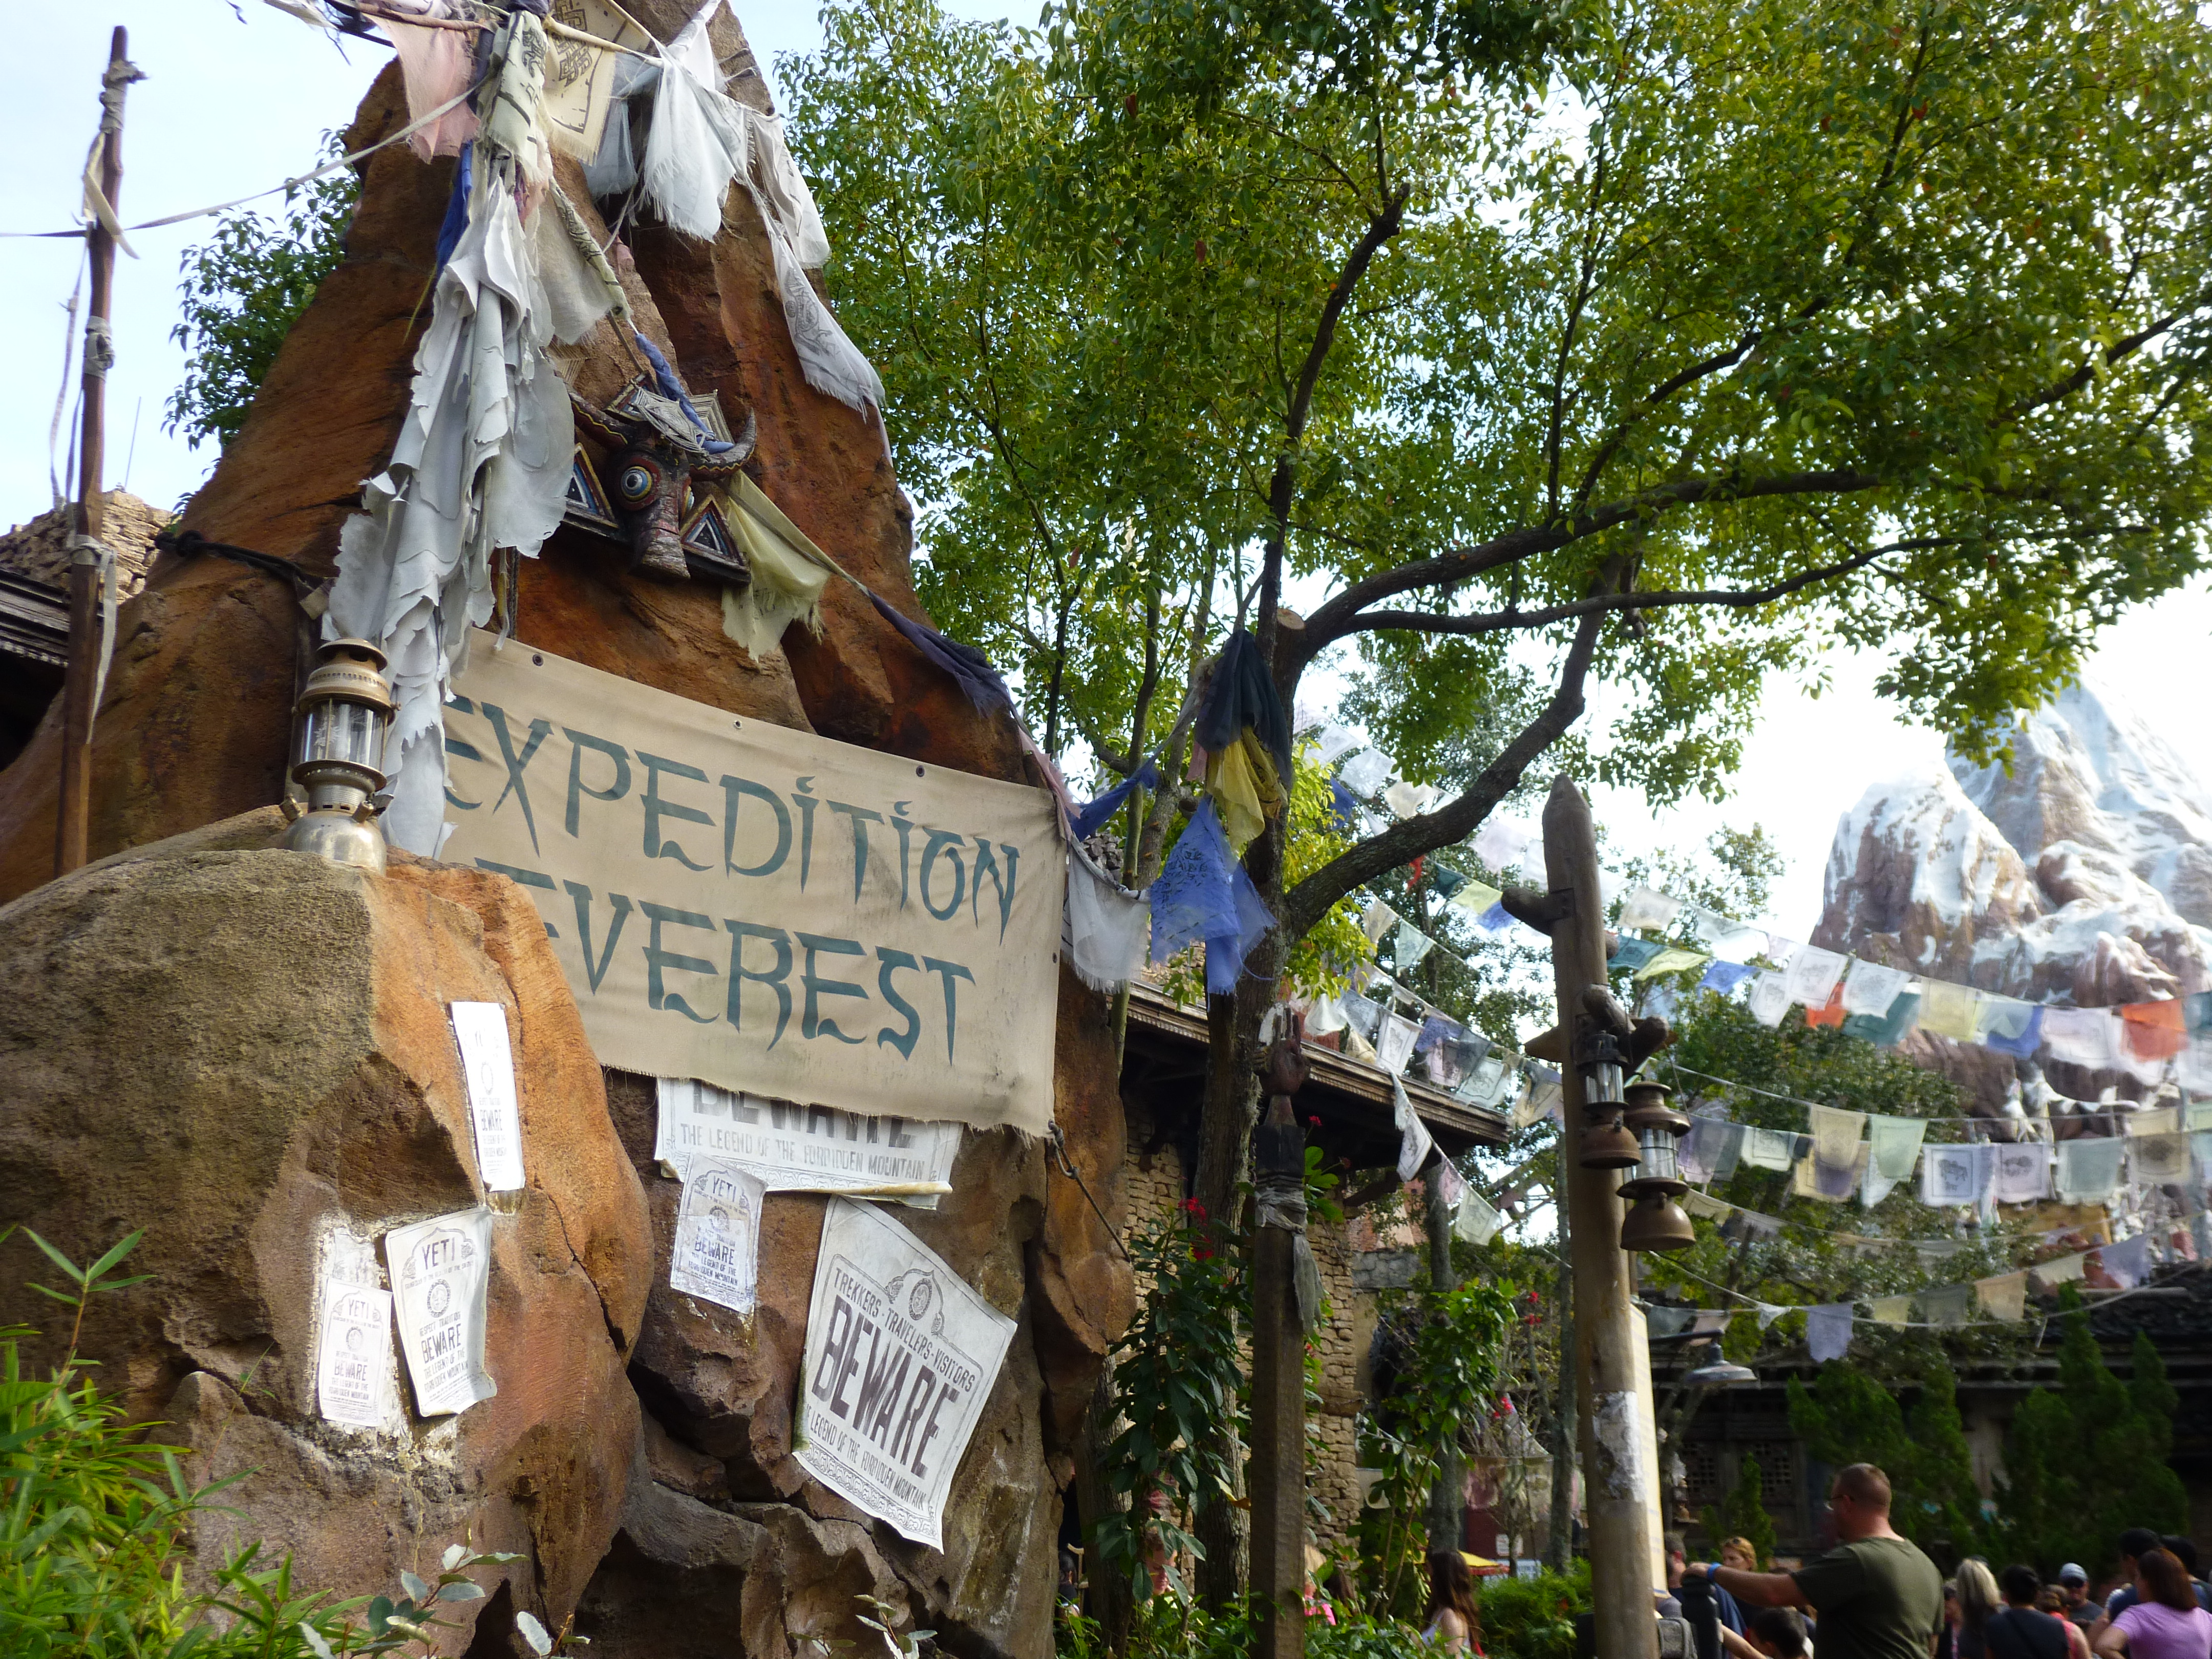 The Yeti at Animal Kingdom's Expedition Everest attraction FINALLY GETS  FIXED!